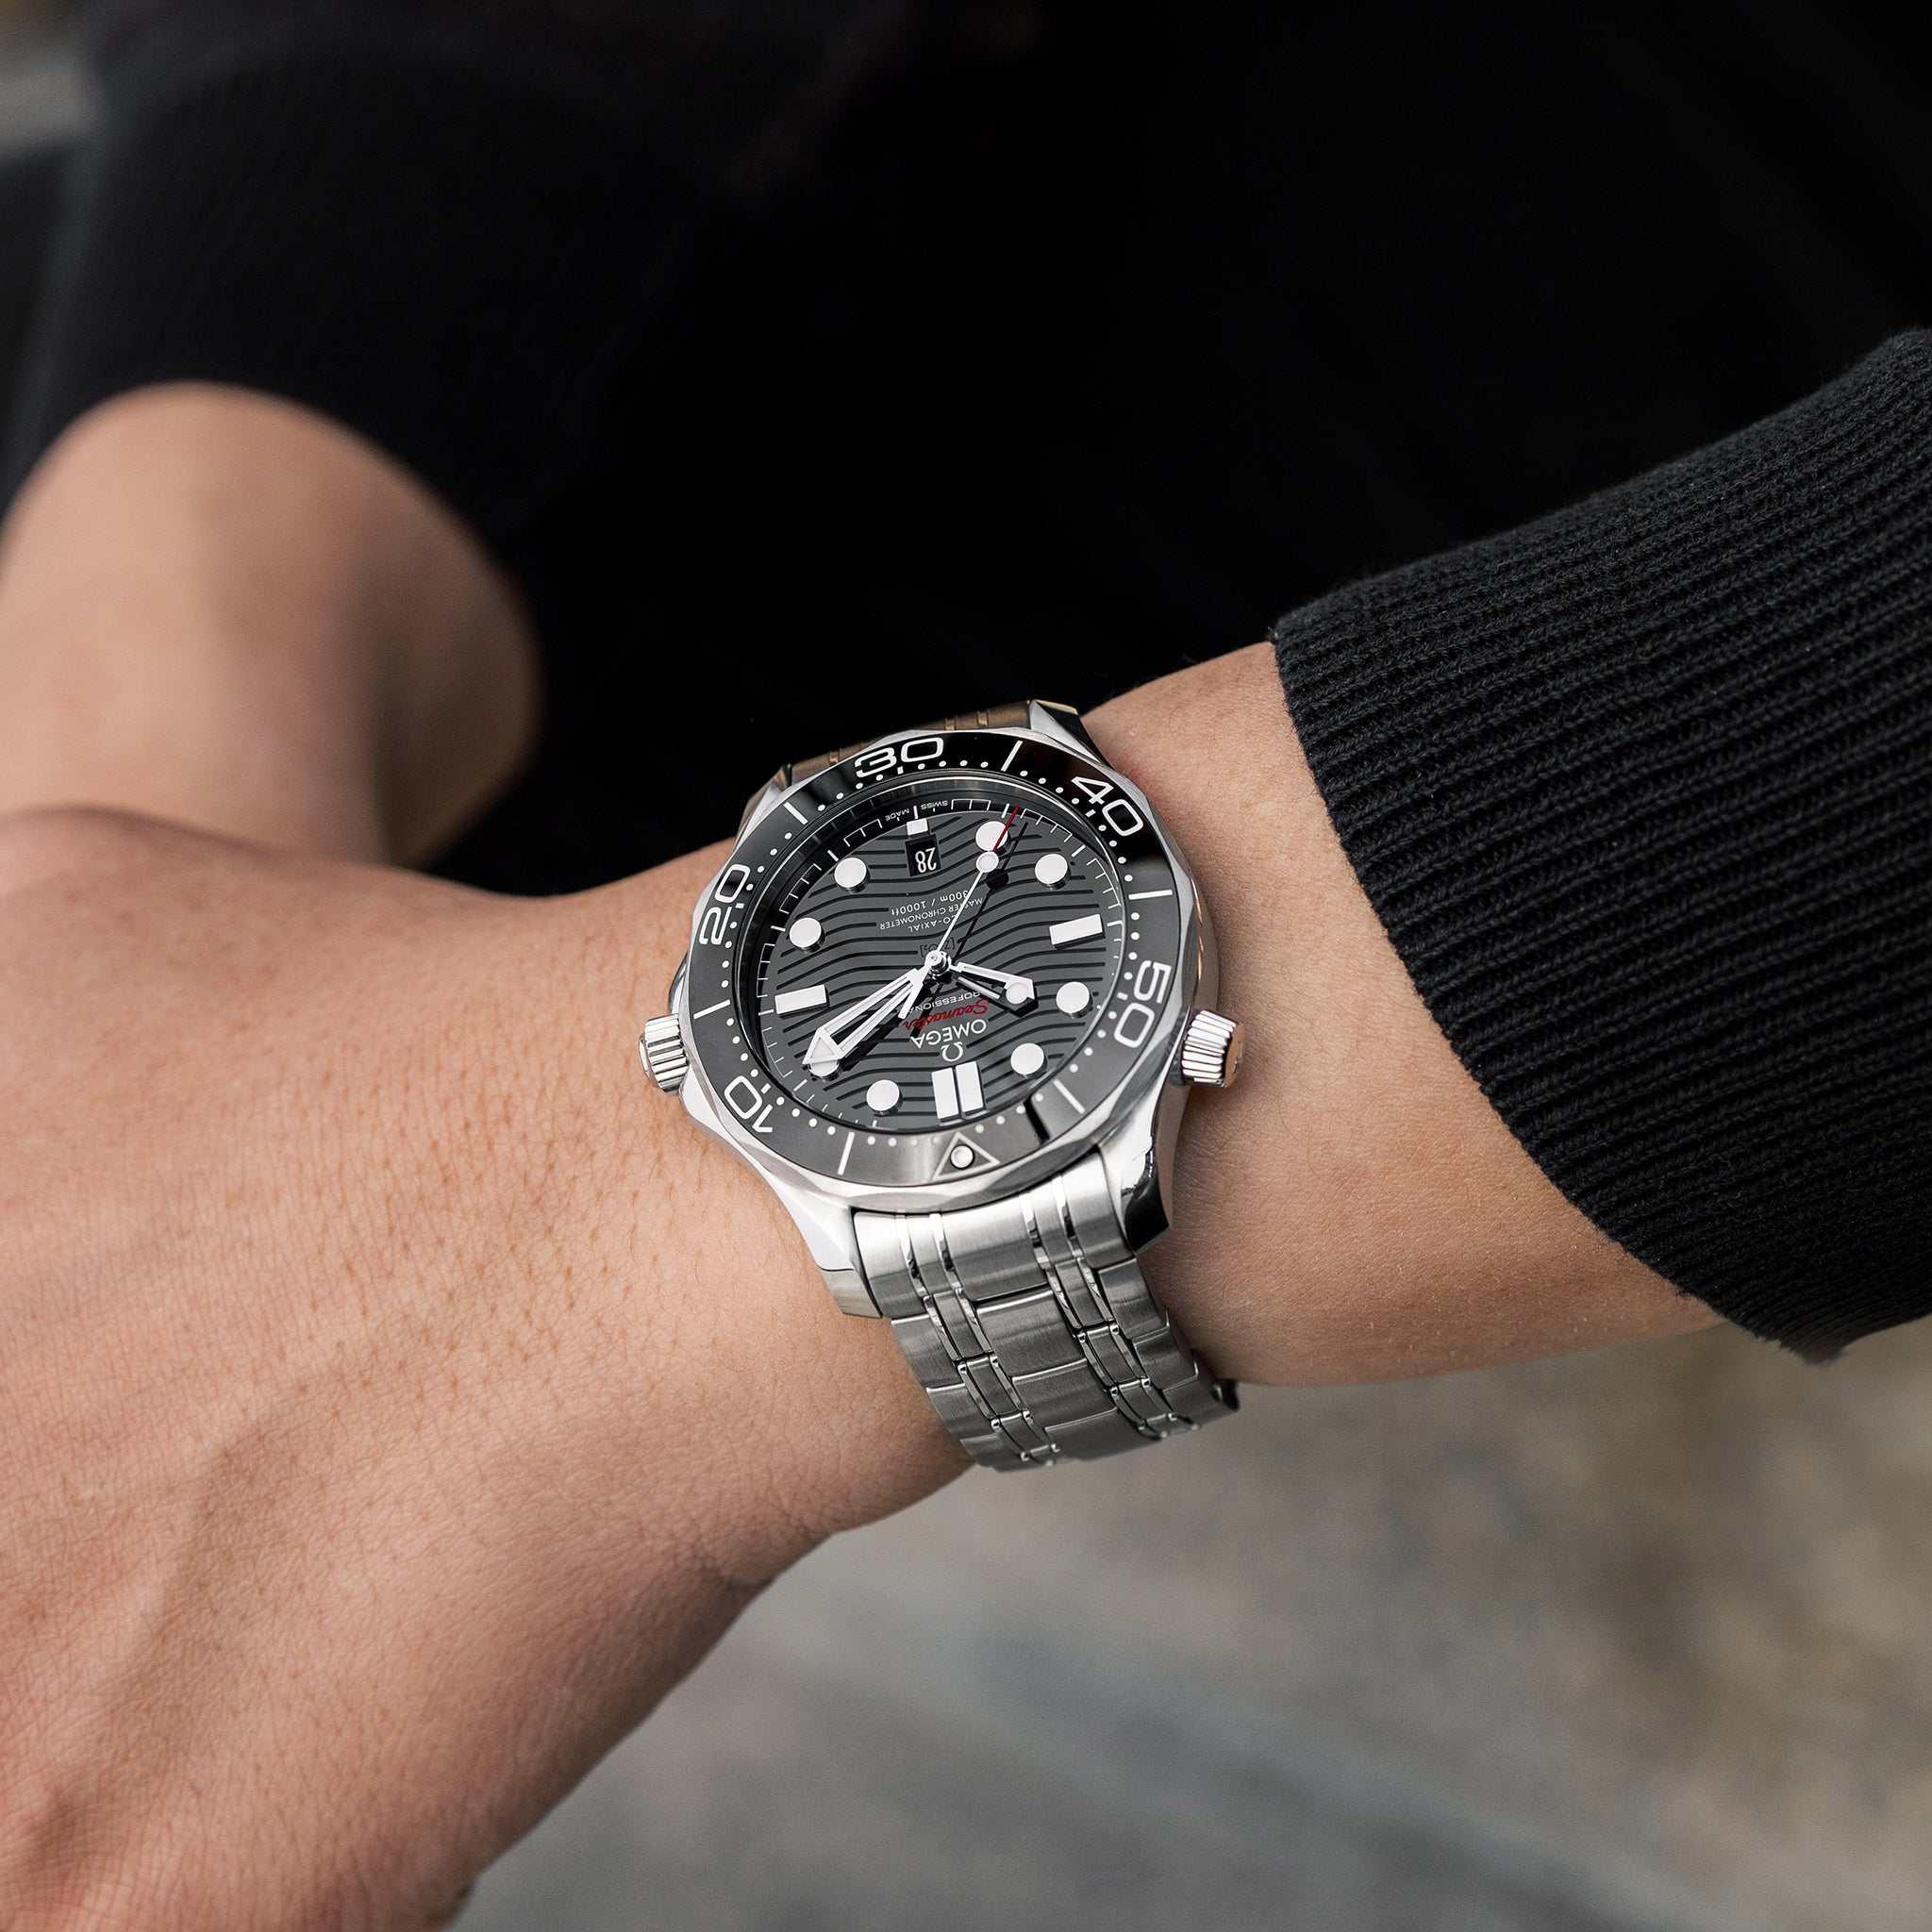 Omega Seamaster Diver 300m Co-Axial 